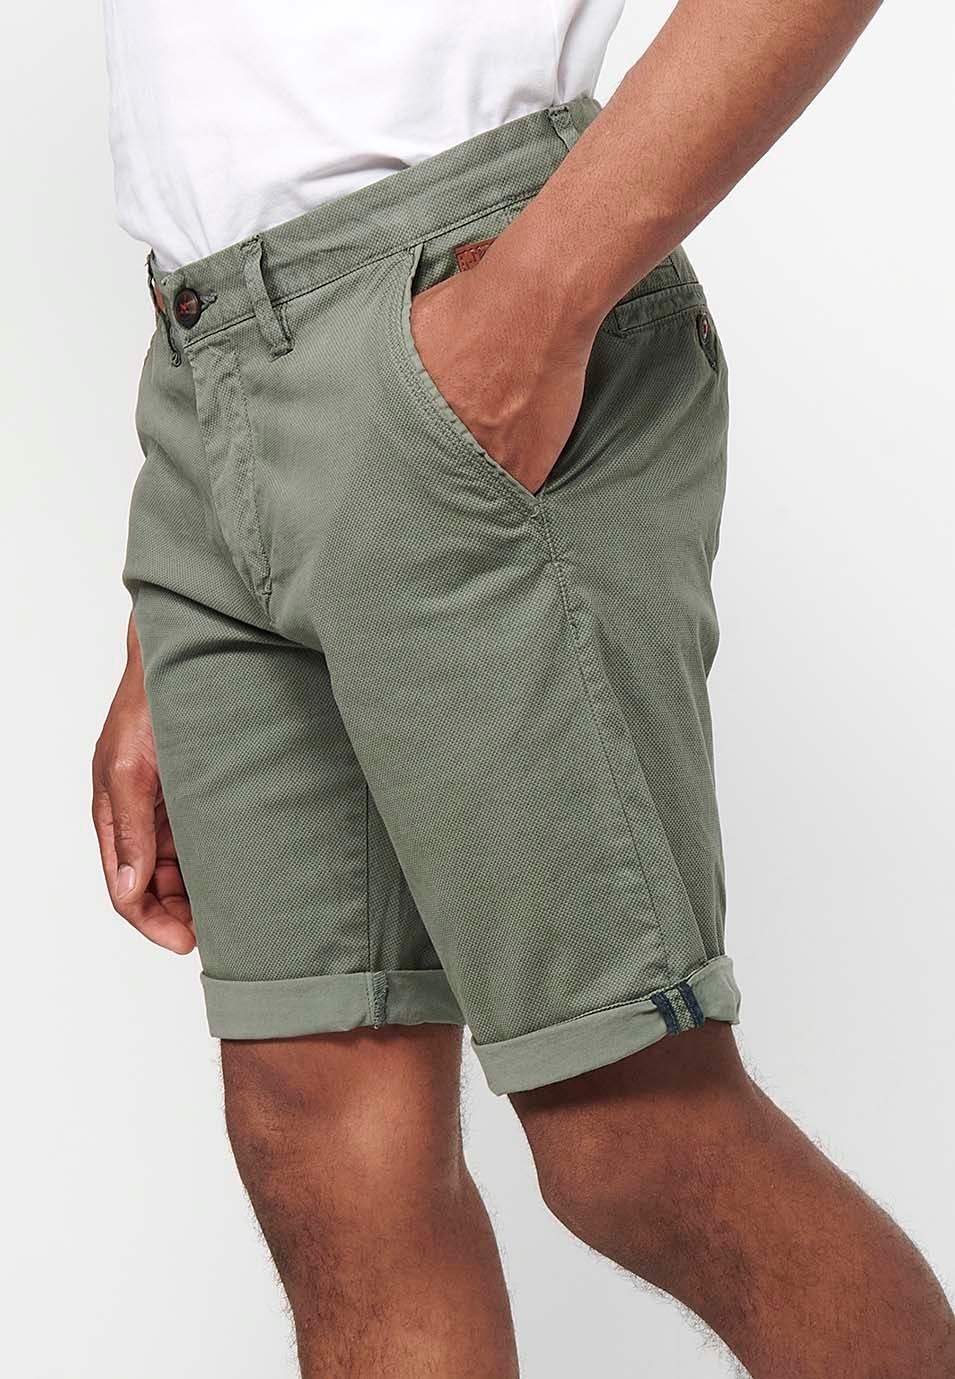 Bermuda Chino Shorts with Turn-Up Finish with Front Zipper and Button Closure with Four Pockets in Green Color for Men 1